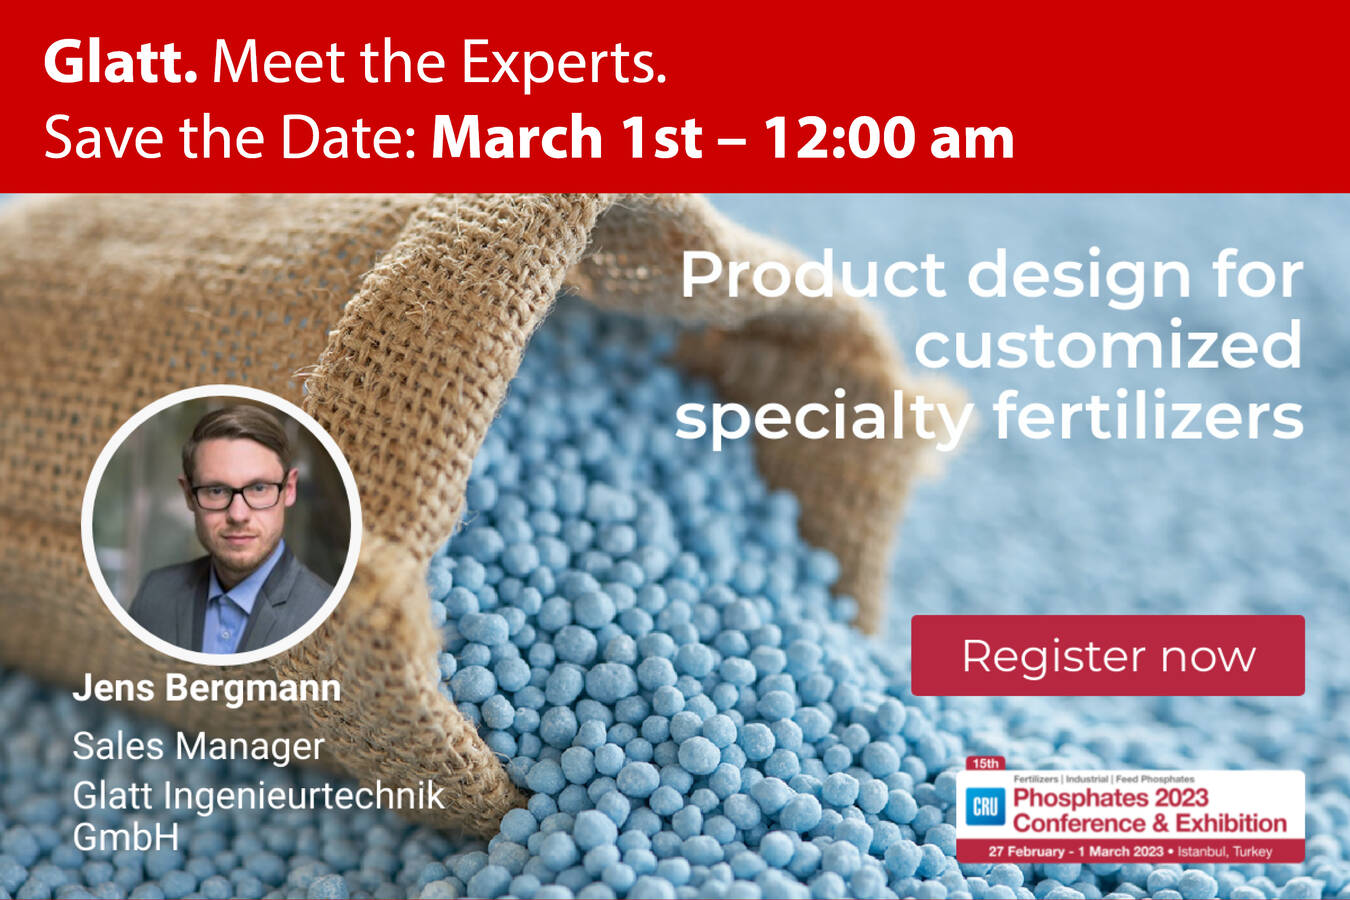 Product Design for Customized Specialty Fertilizers - Phosphates 2023 Meet the Glatt Experts at Phosphates 2023 in Instanbul. Save the Date: March 1st – 12:00am